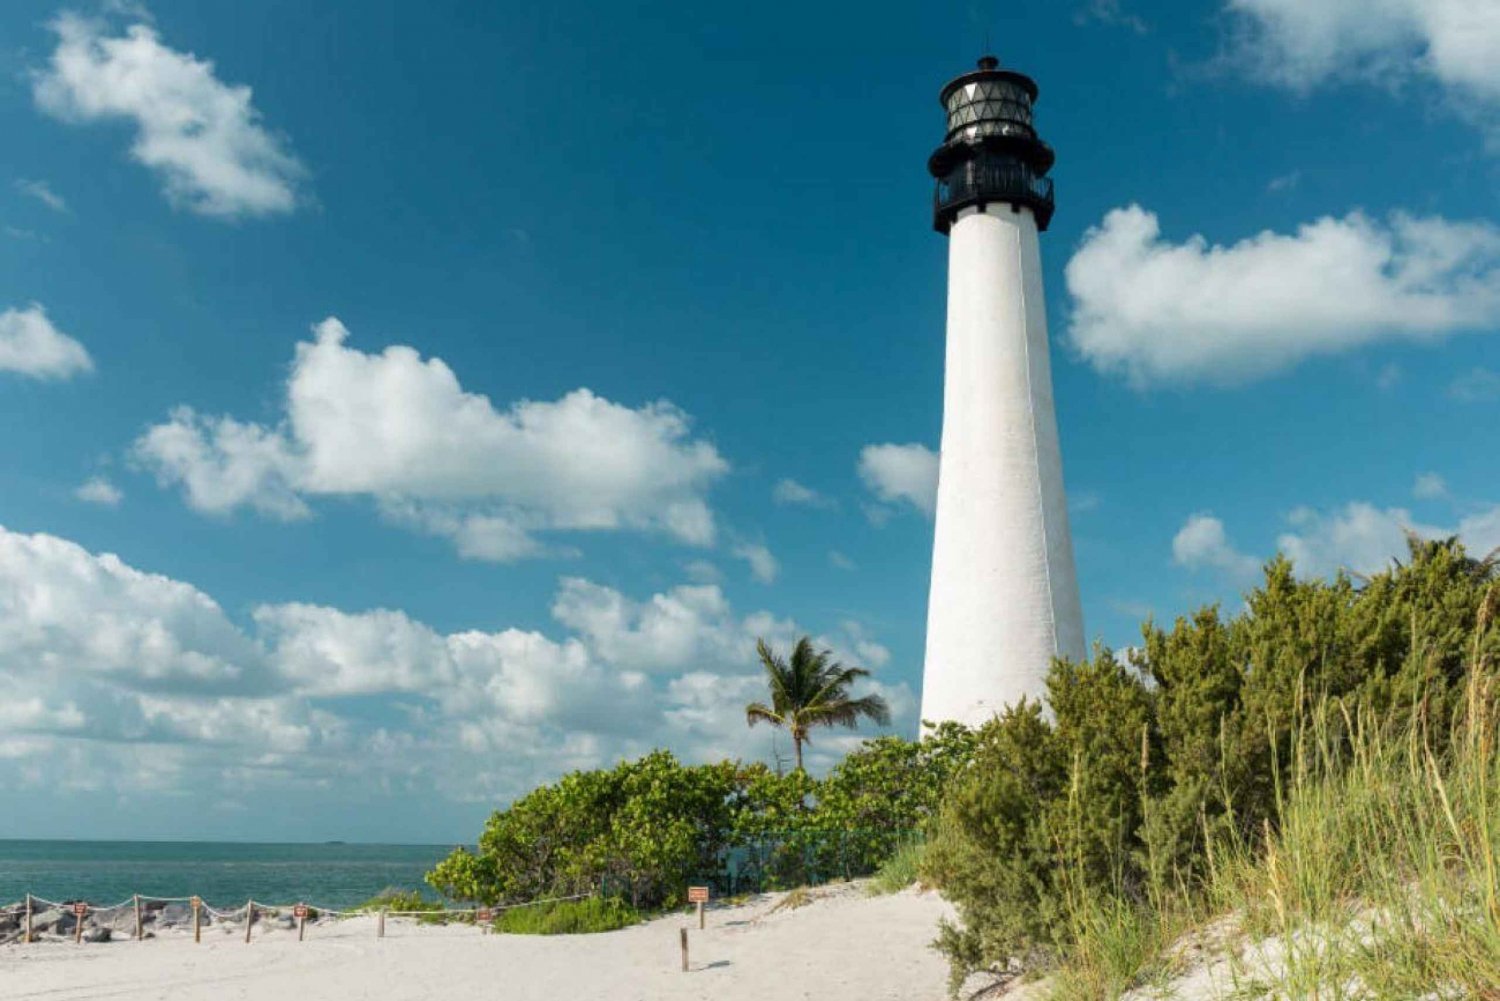 Miami: Visit to the Lighthouse - Key Biscayne - Brickell